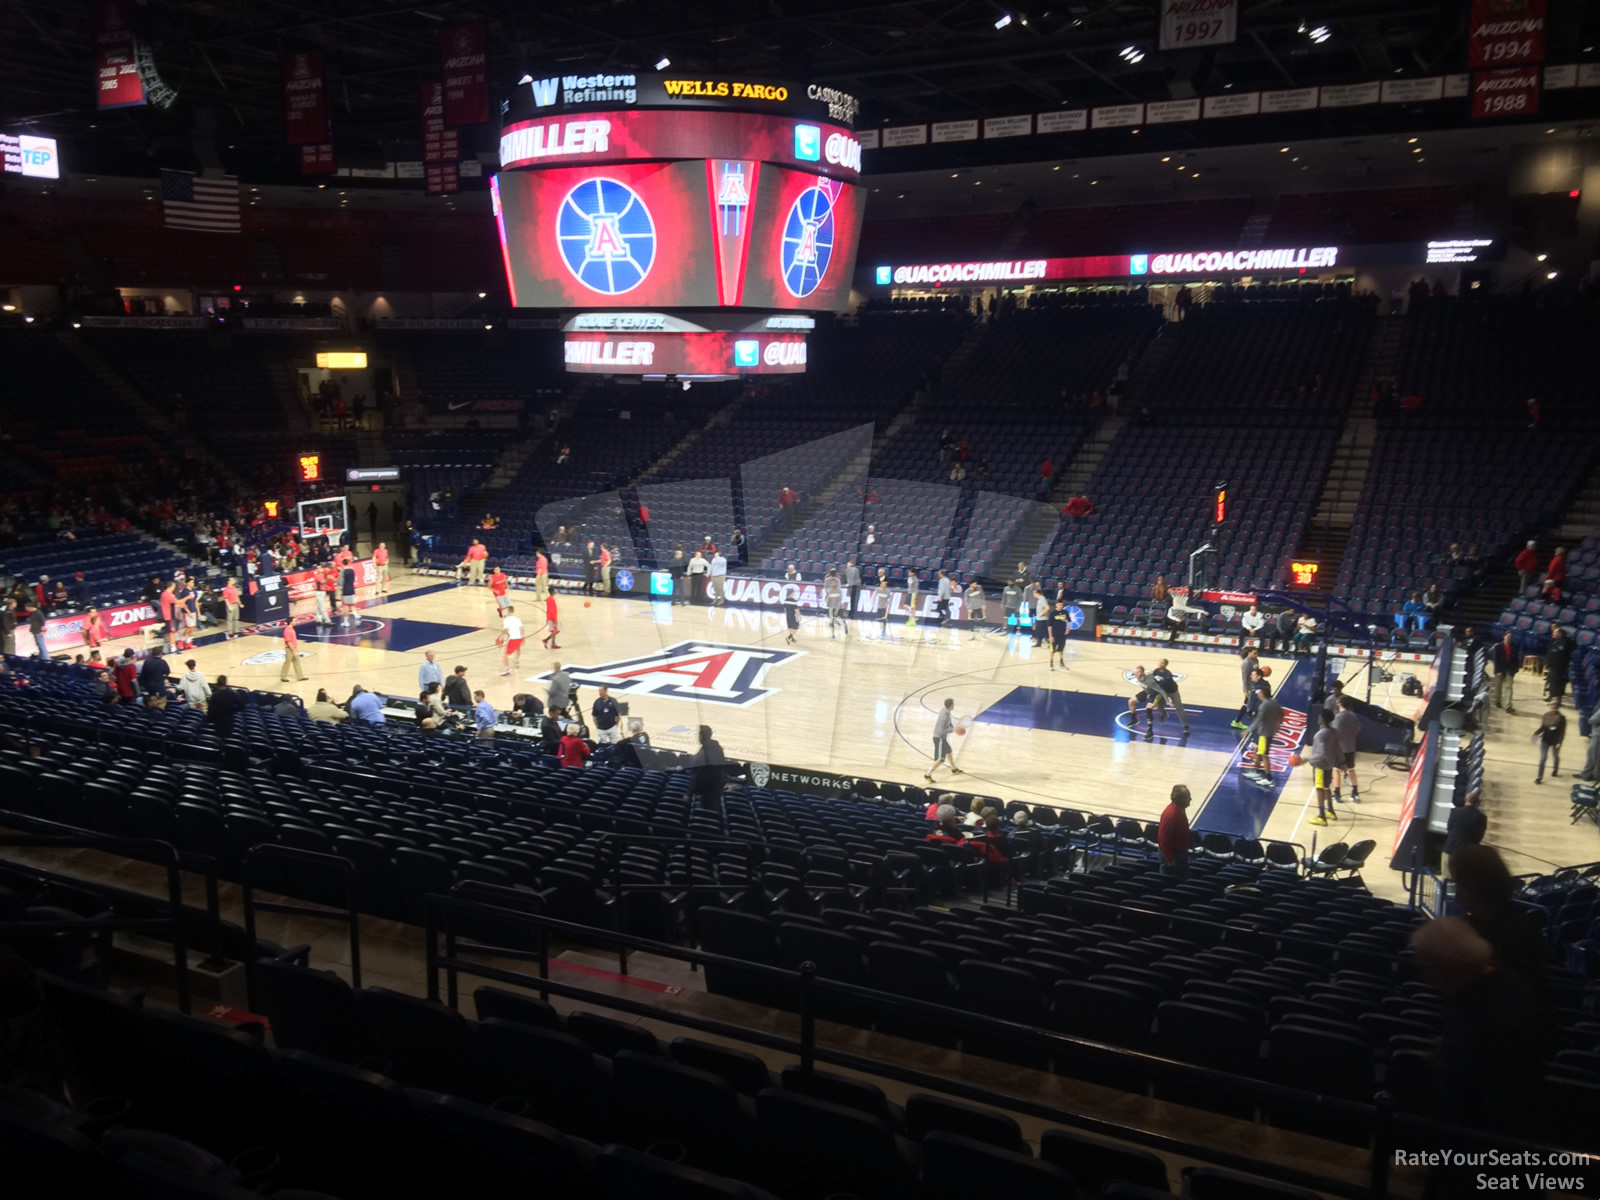 section 13, row 23 seat view  - mckale center